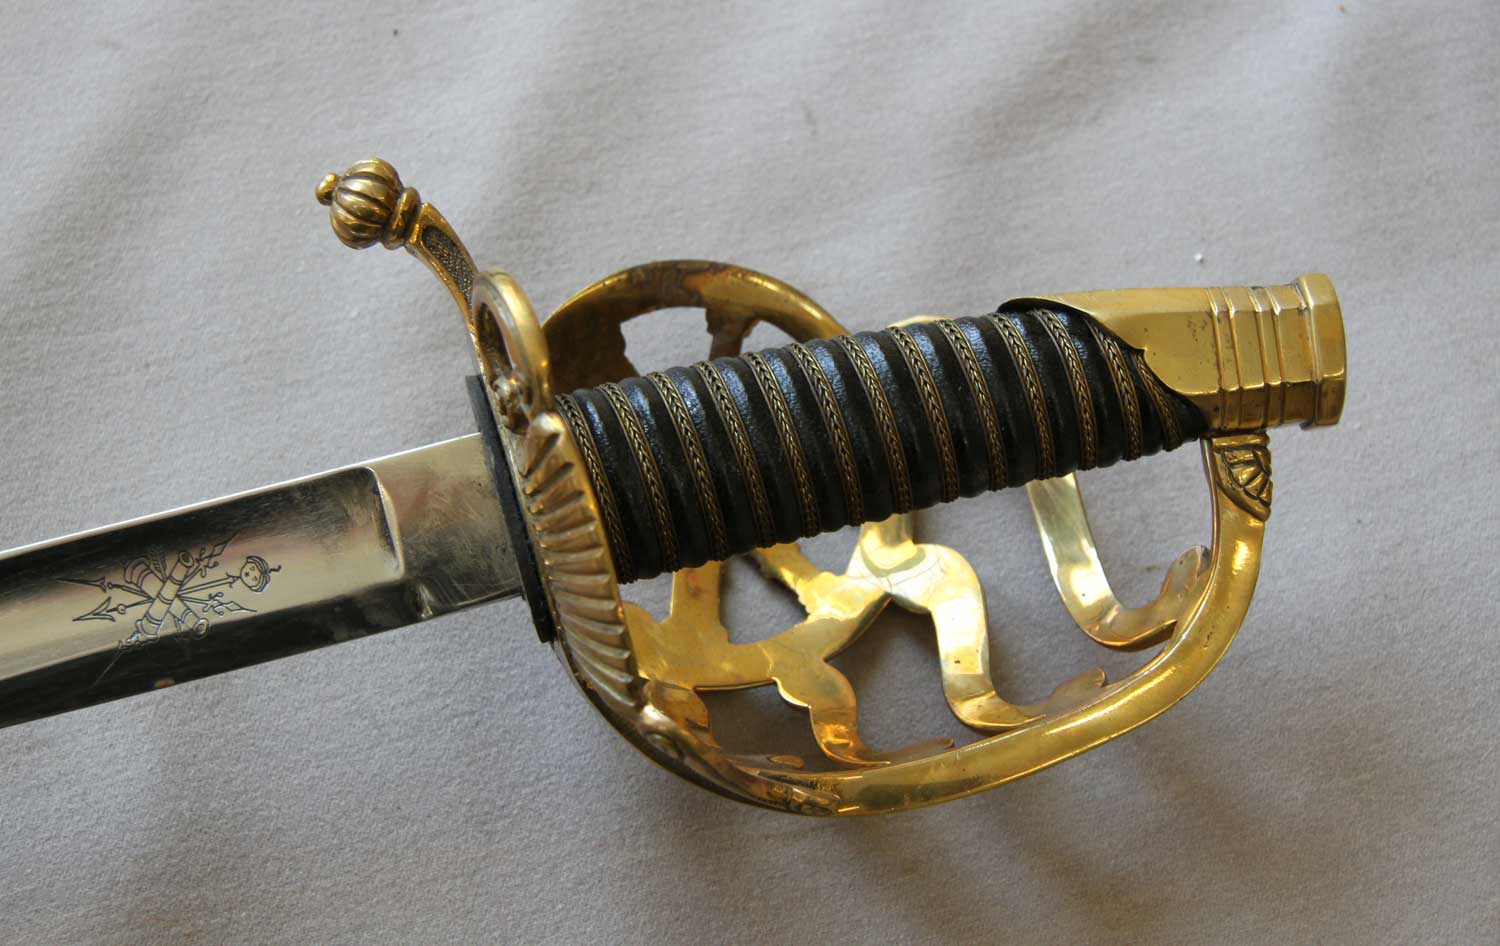 French, Cavalry, Officer's Sword Belt [09-305] : Historical Twist